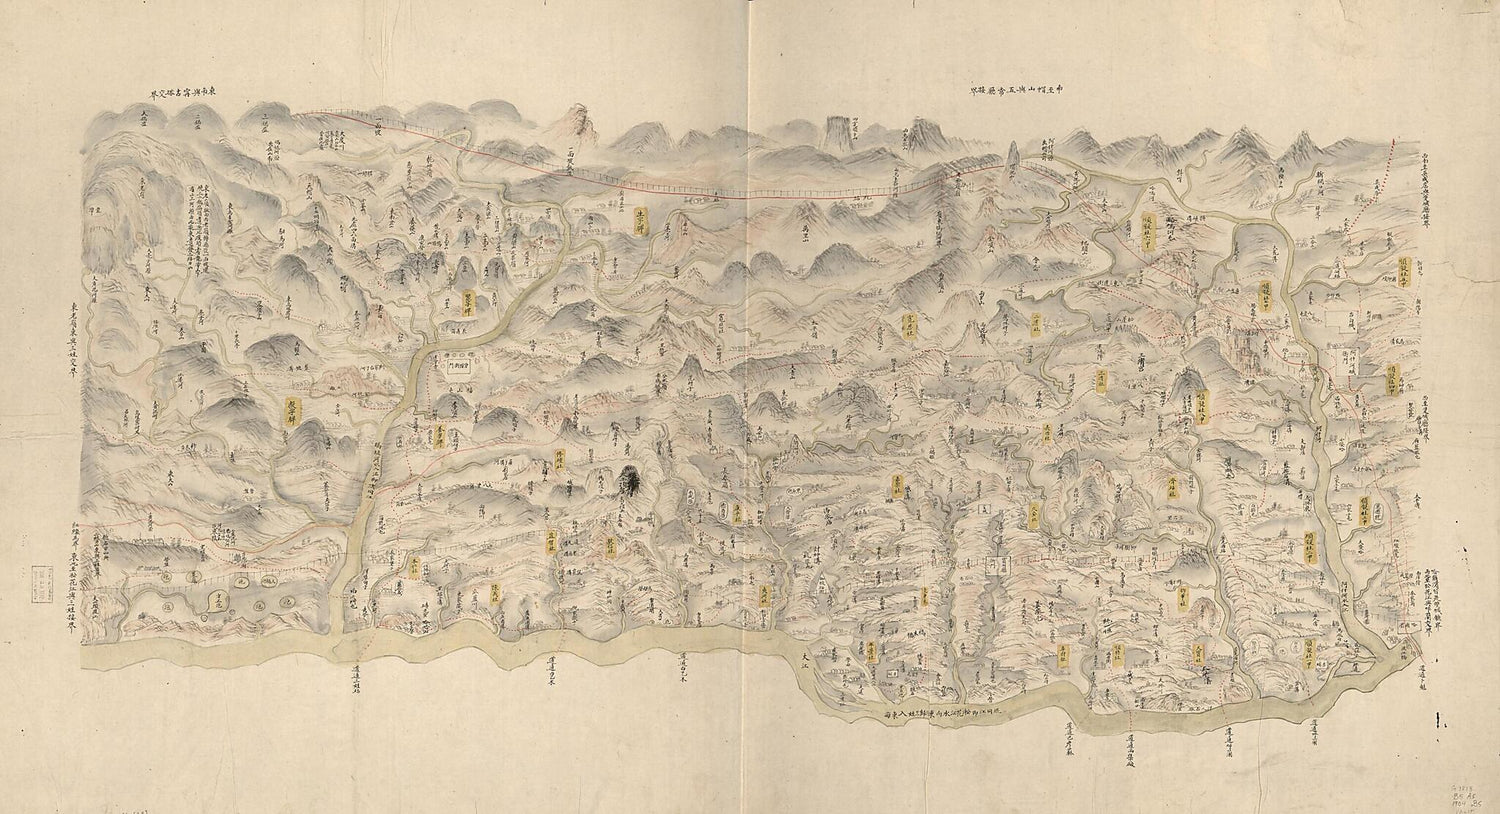 This old map of Binzhou Ting Xiang She Quan Tu (賓州廳鄉社全圖, Complete Commune Map of Binzhou Prefecture) from 1902 was created by Arthur W. (Arthur William) Hummel in 1902